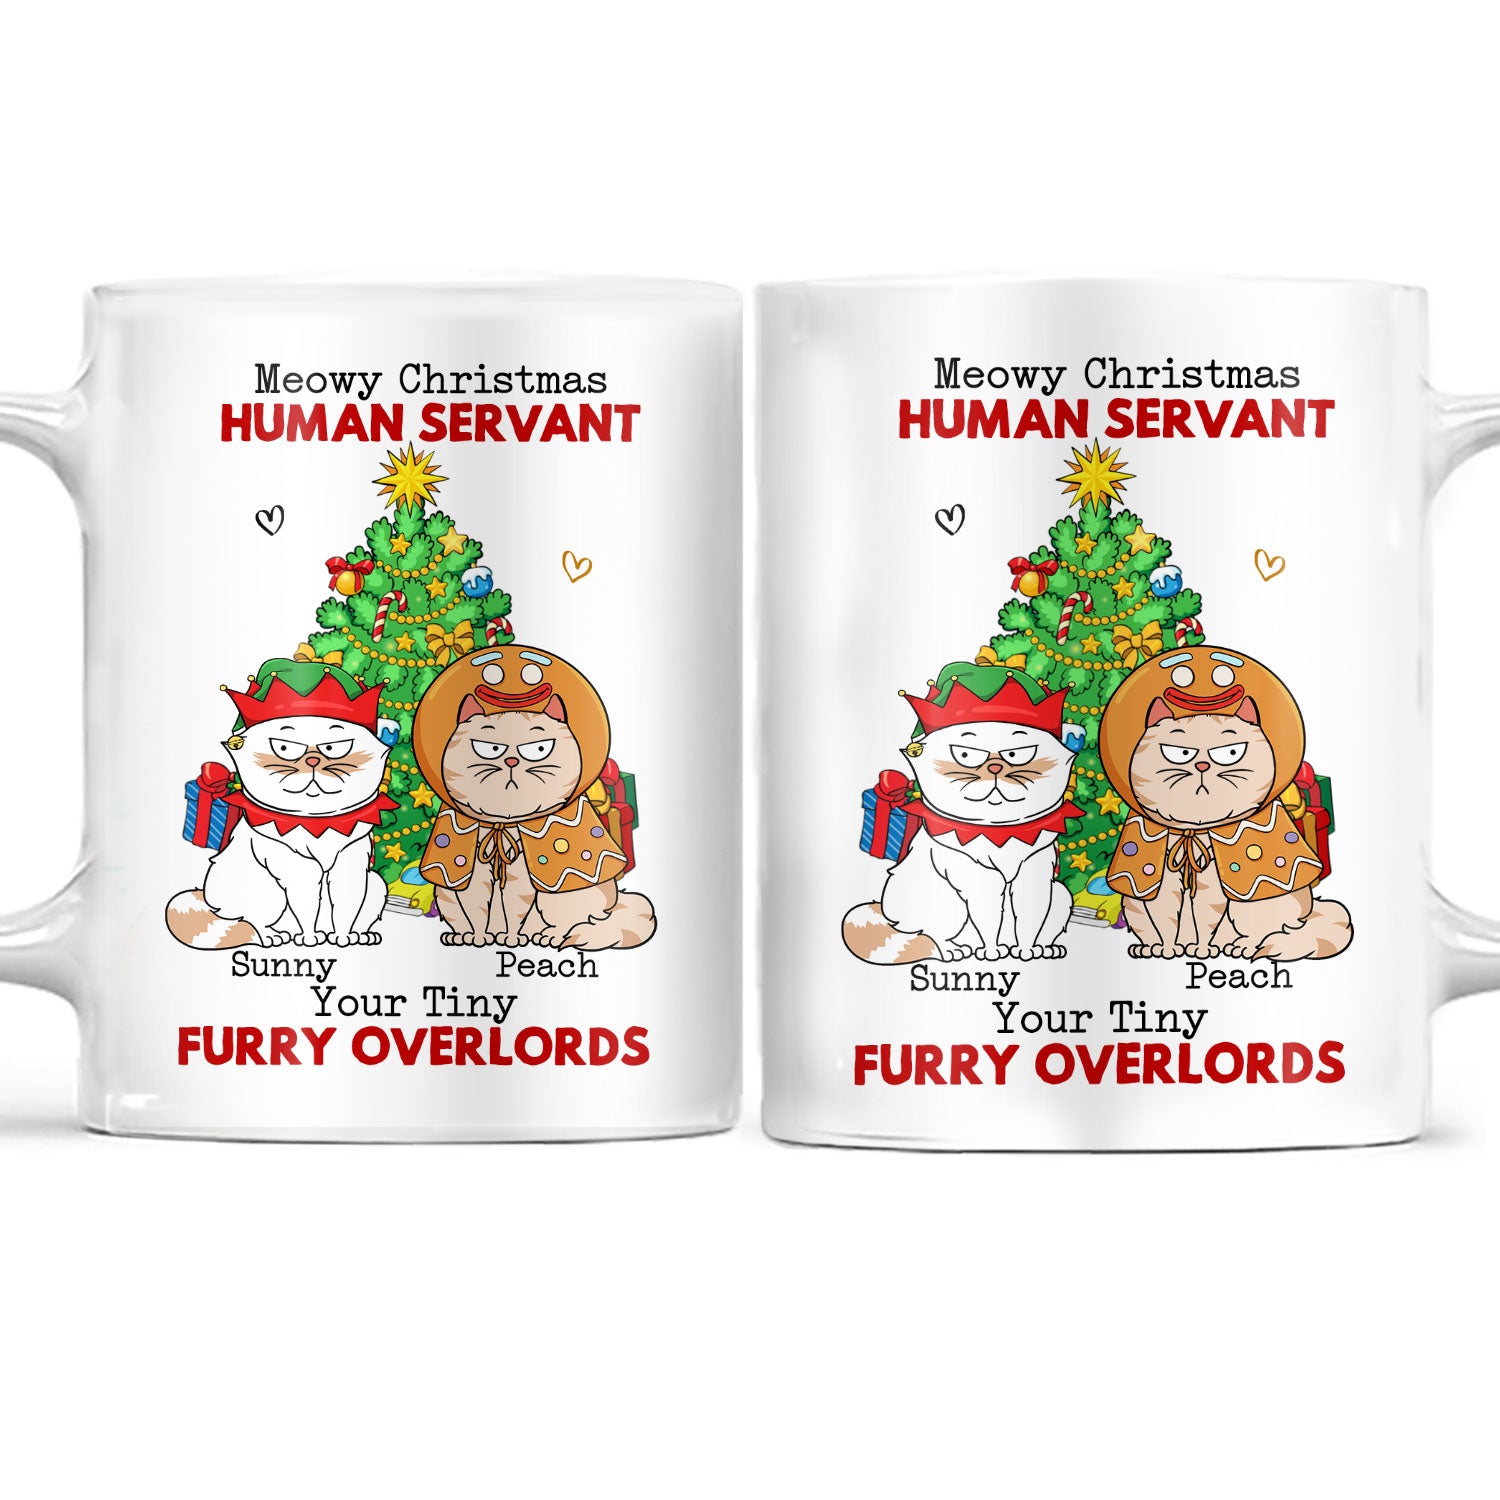 Meowy Christmas Human Servant Your Tinny Furry Overlords - Christmas Gift For Cat Lovers - Personalized White Edge-to-Edge Mug